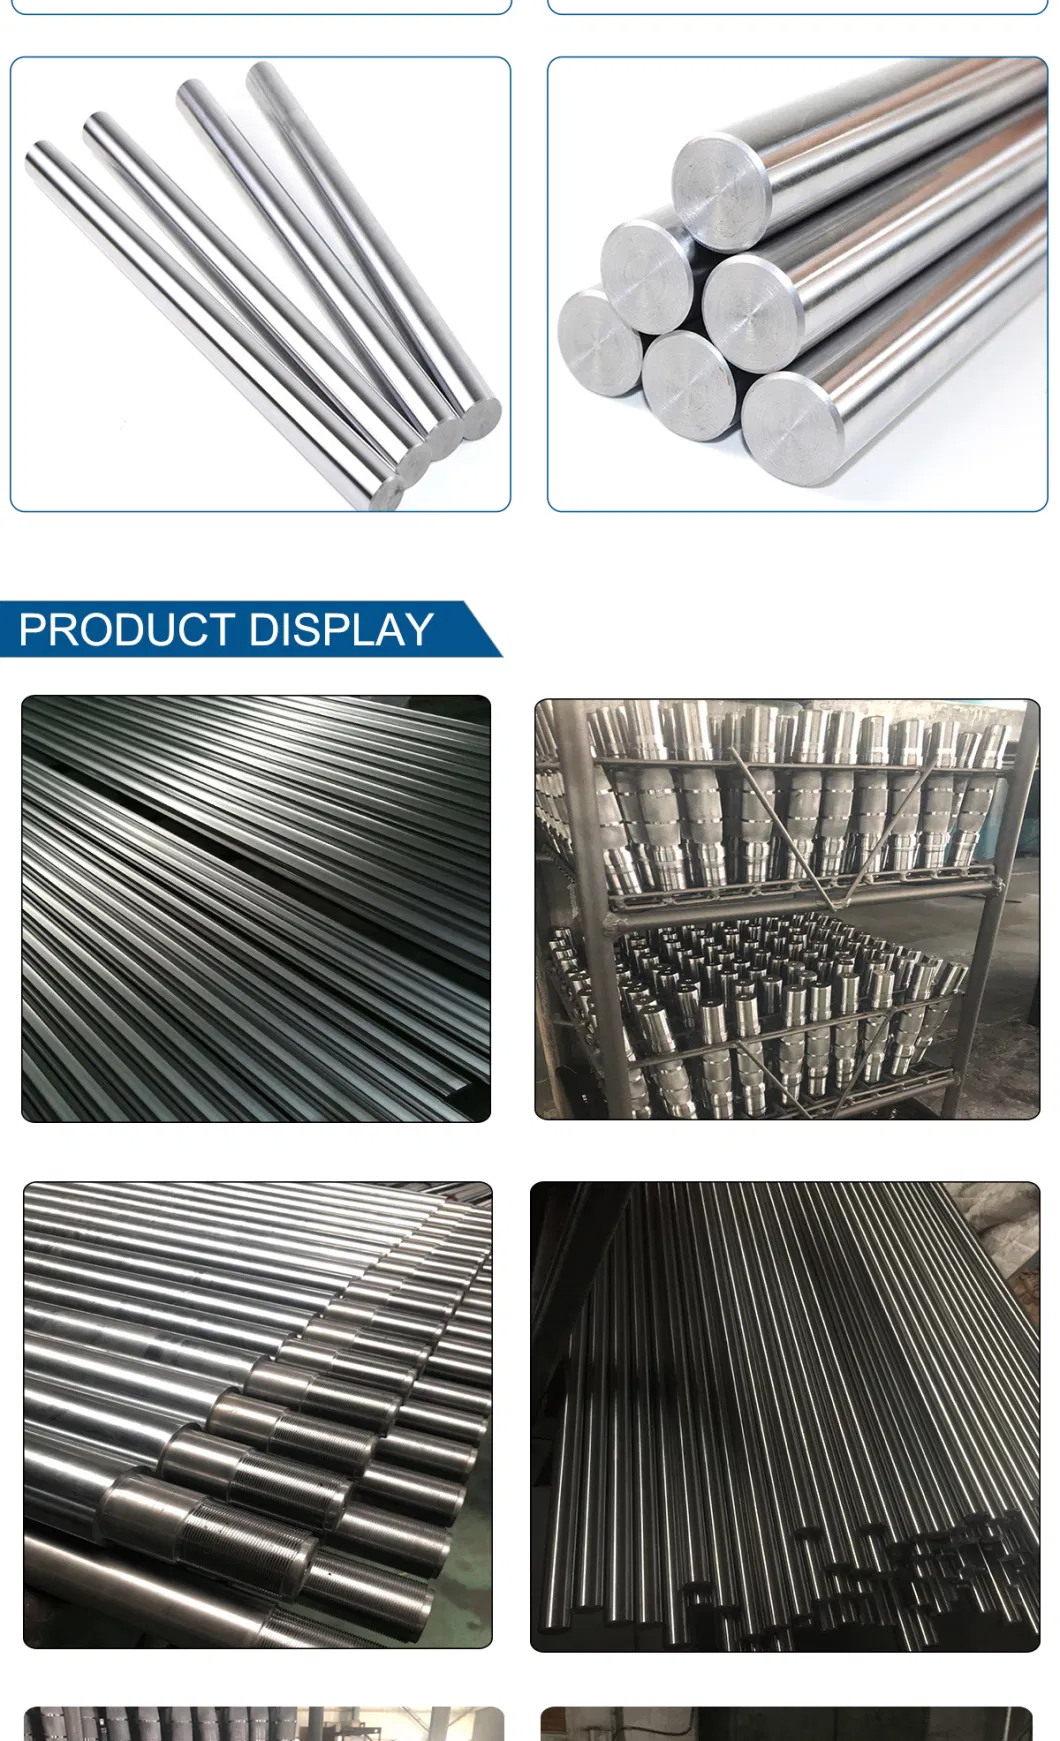 Steel Roud Bar Wholesale Dia 6mm. 8mm. 10mm. 12mm, Length 1000mm Chrome Plated Rod